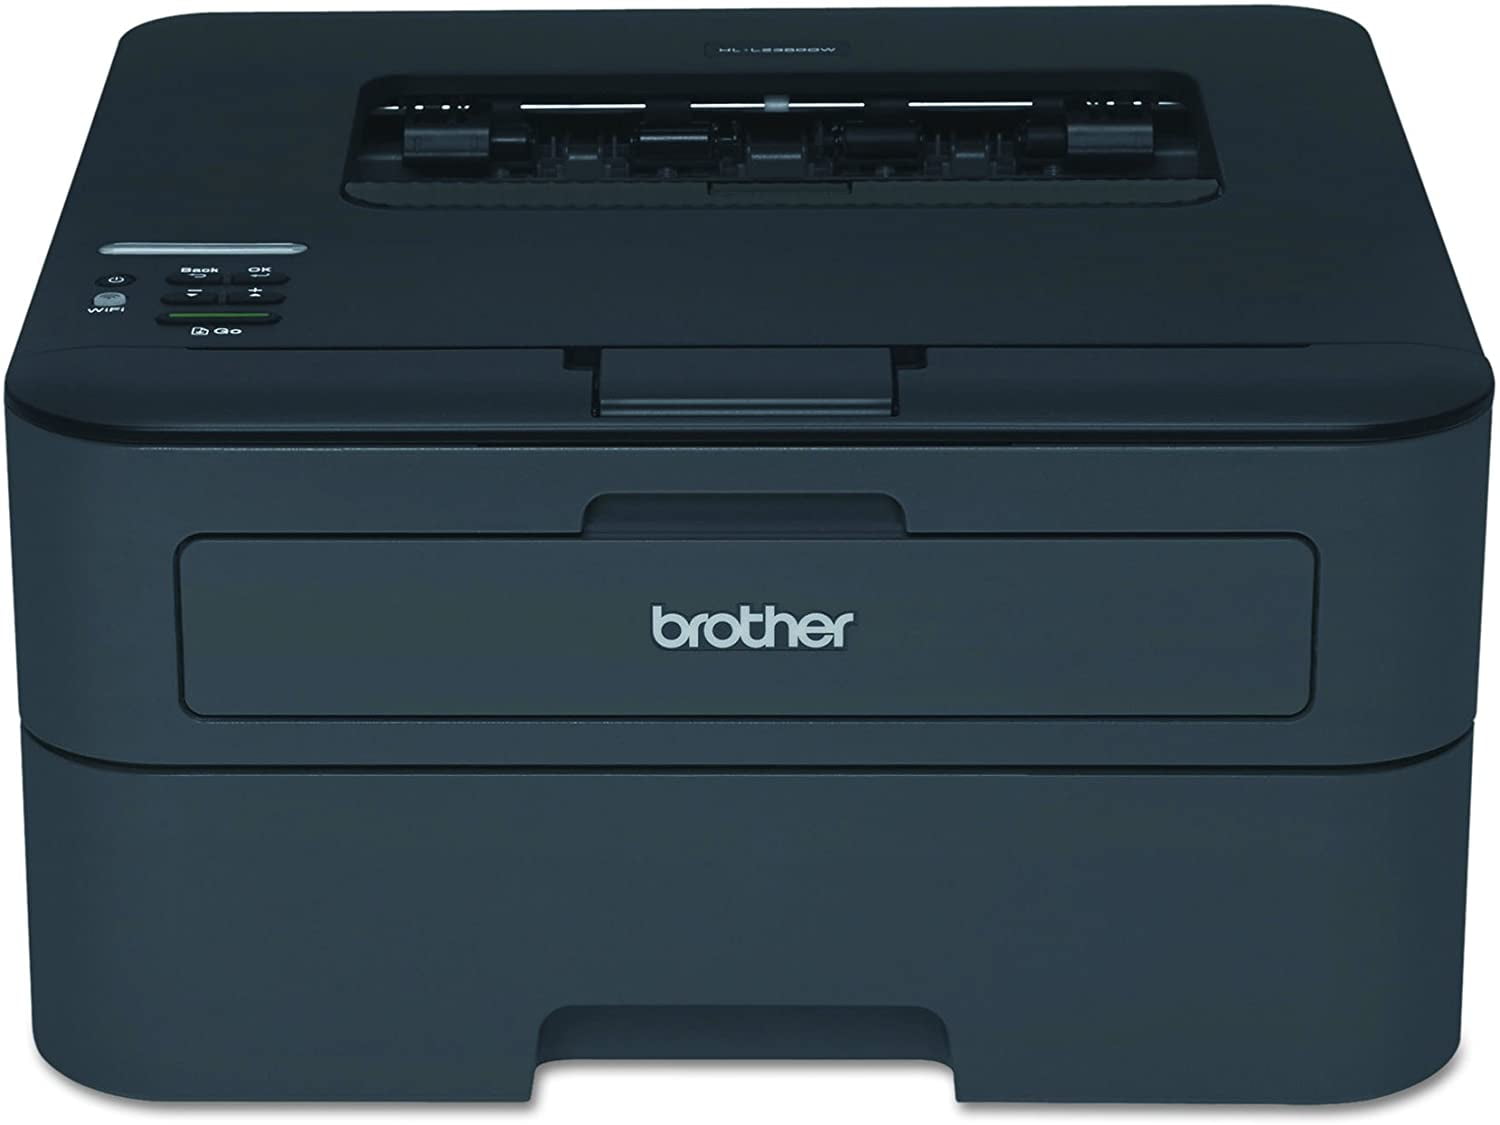 Brother HLL2340DW Compact Laser Printer, Monochrome, Wireless Connectivity, TwoSided Printing